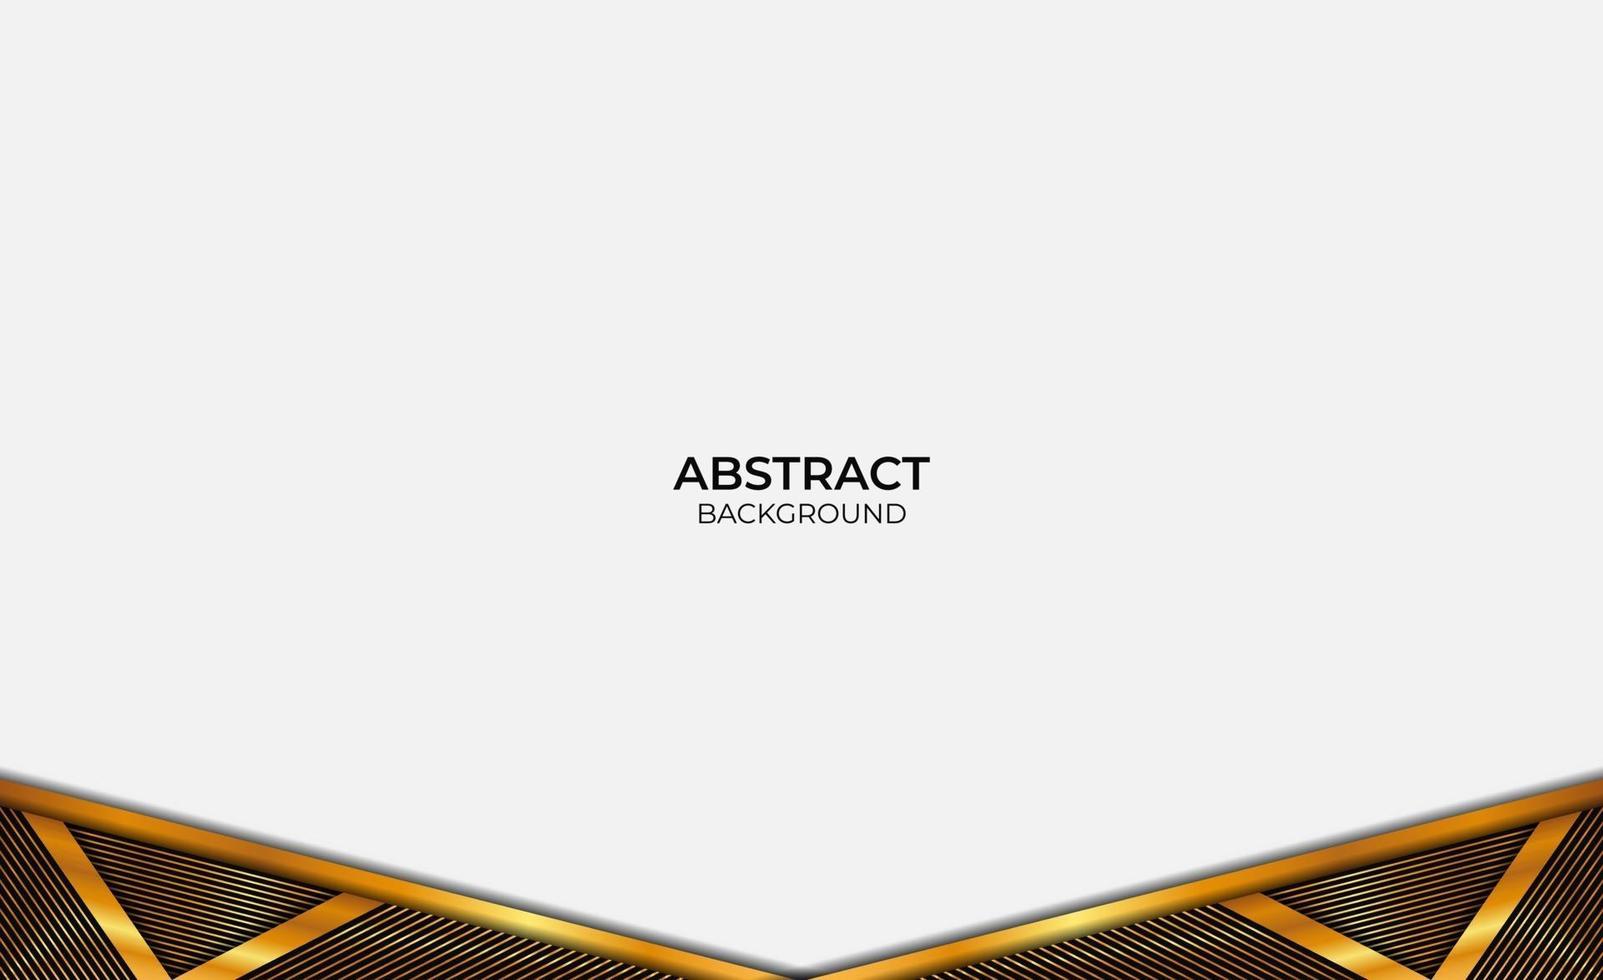 Background Abstract Luxury Gold And Black Design vector